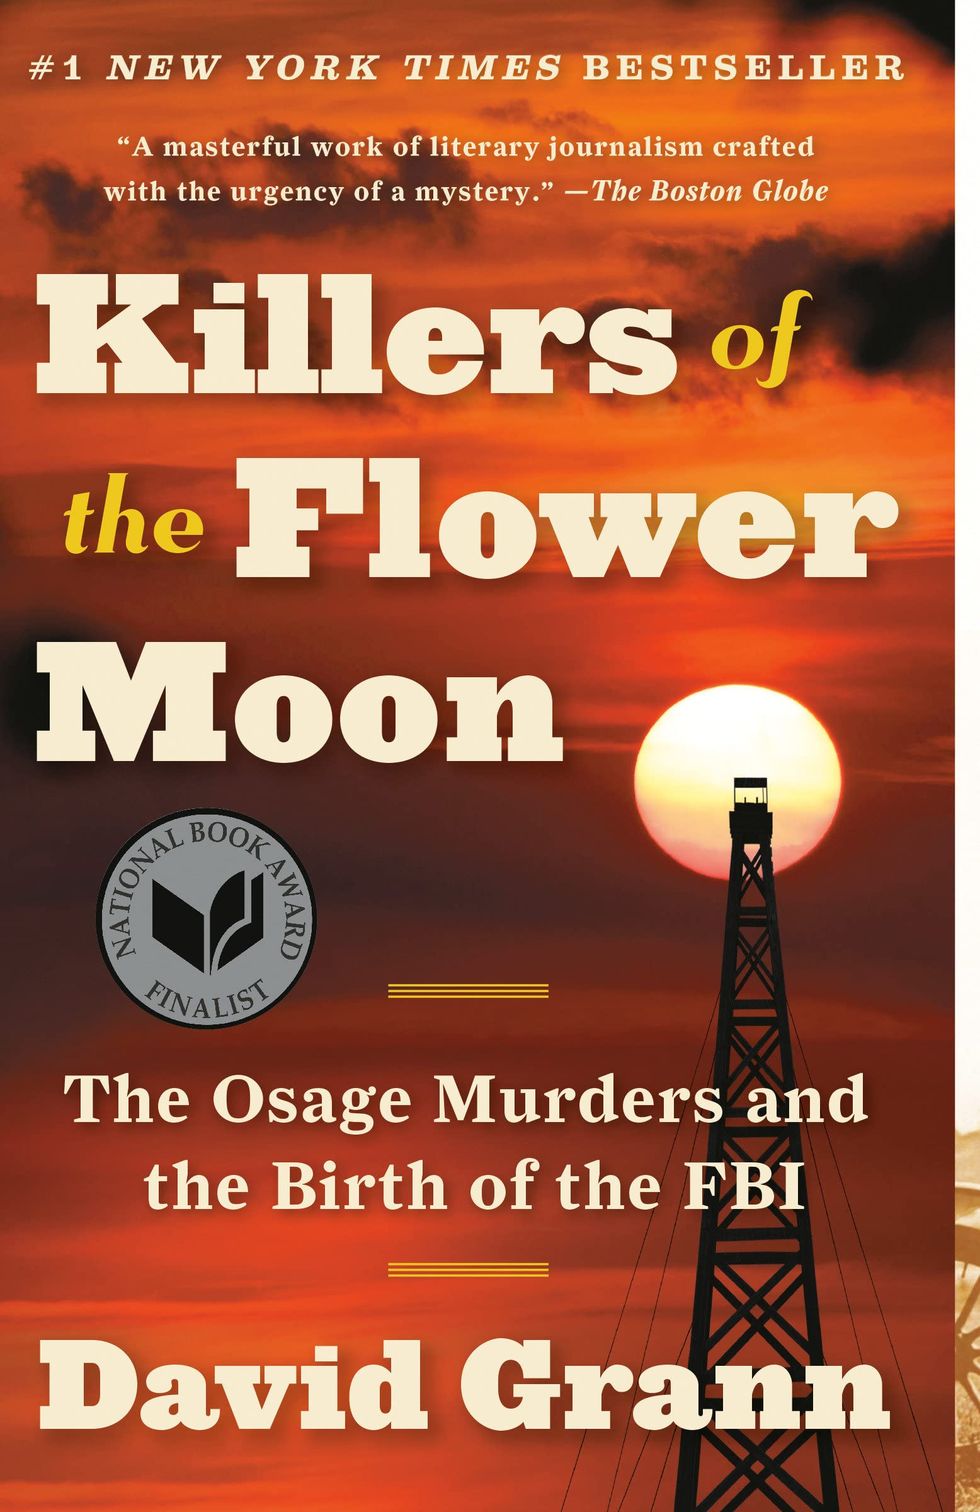 <i>Killers of the Flower Moon: The Osage Murders and the Birth of the FBI</i> by David Grann